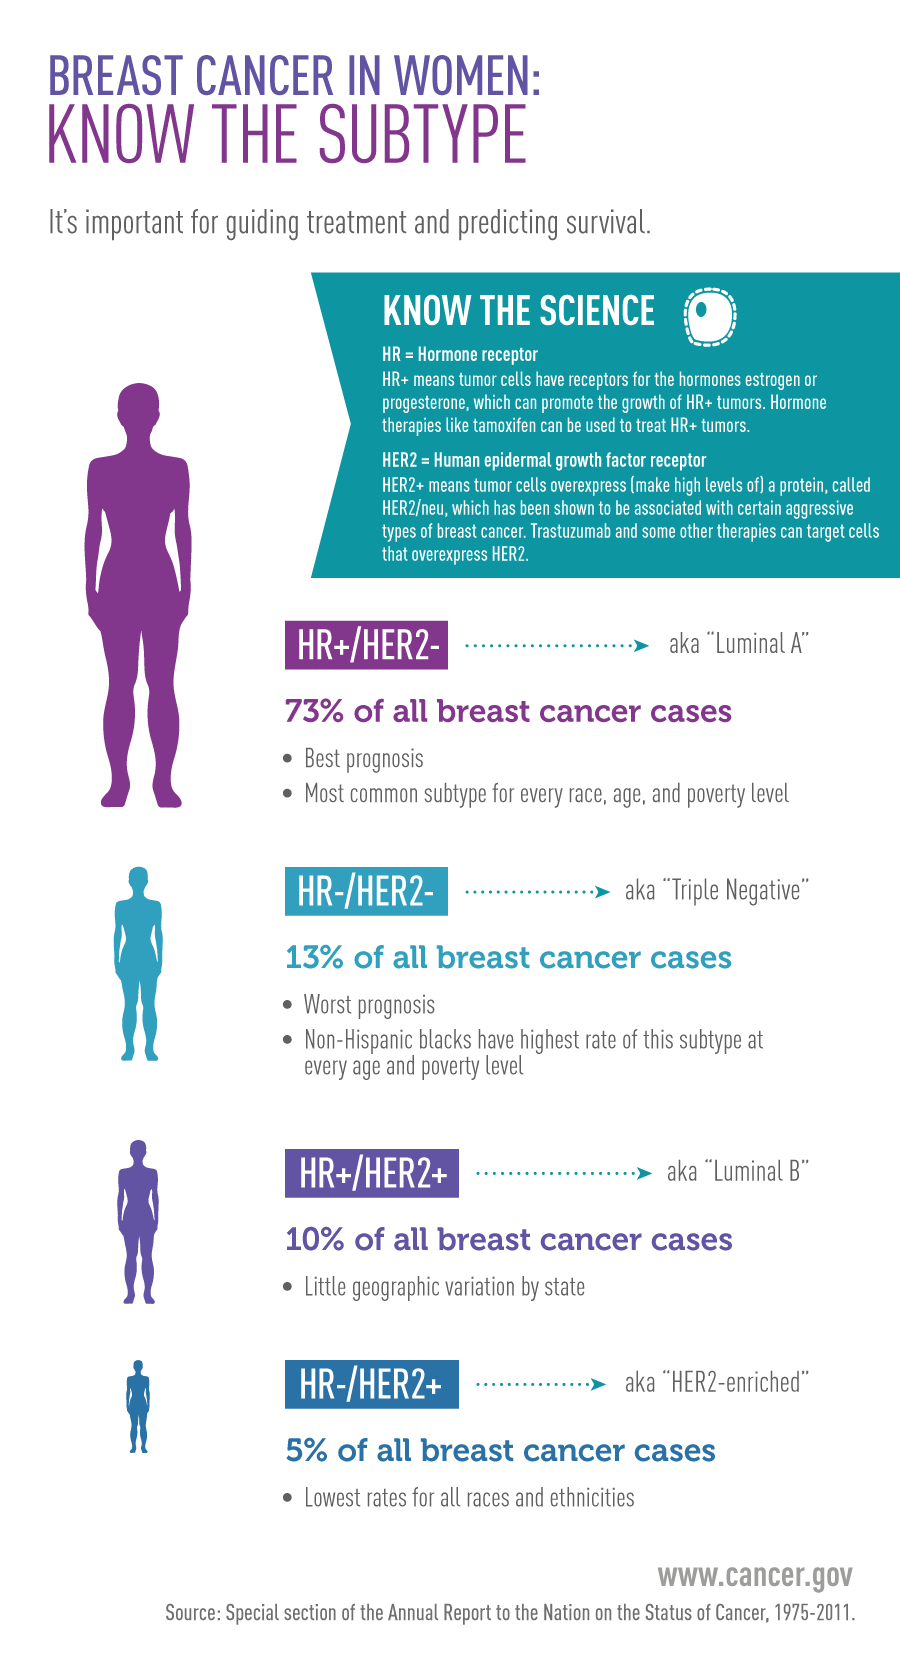 Breast cancer in women: know the subtype: HR+/HER2- (aka Luminal A), 73% of all breast cancer cases; HR-/HER2- (aka Triple Negative) 13% of all breast cancer cases; and HR+/HER2+ (aka HER2-enriched) 5% of all breast cancer cases.